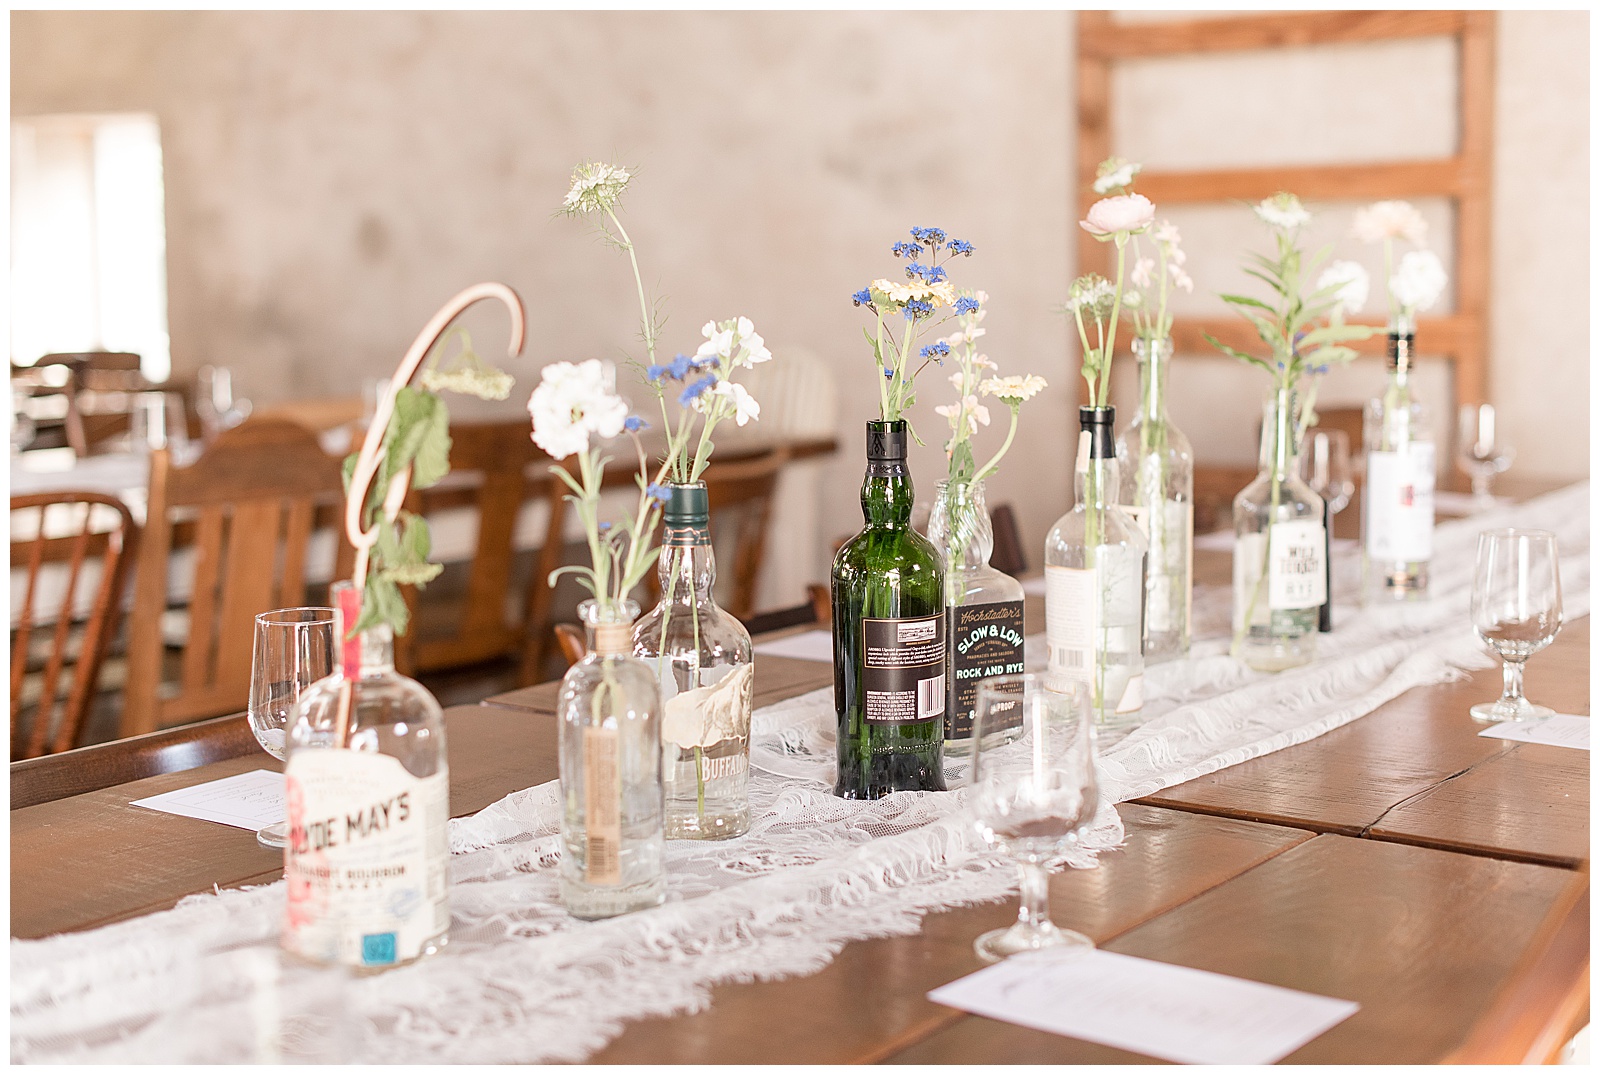 whine bottles and flowers as centerpieces for reception